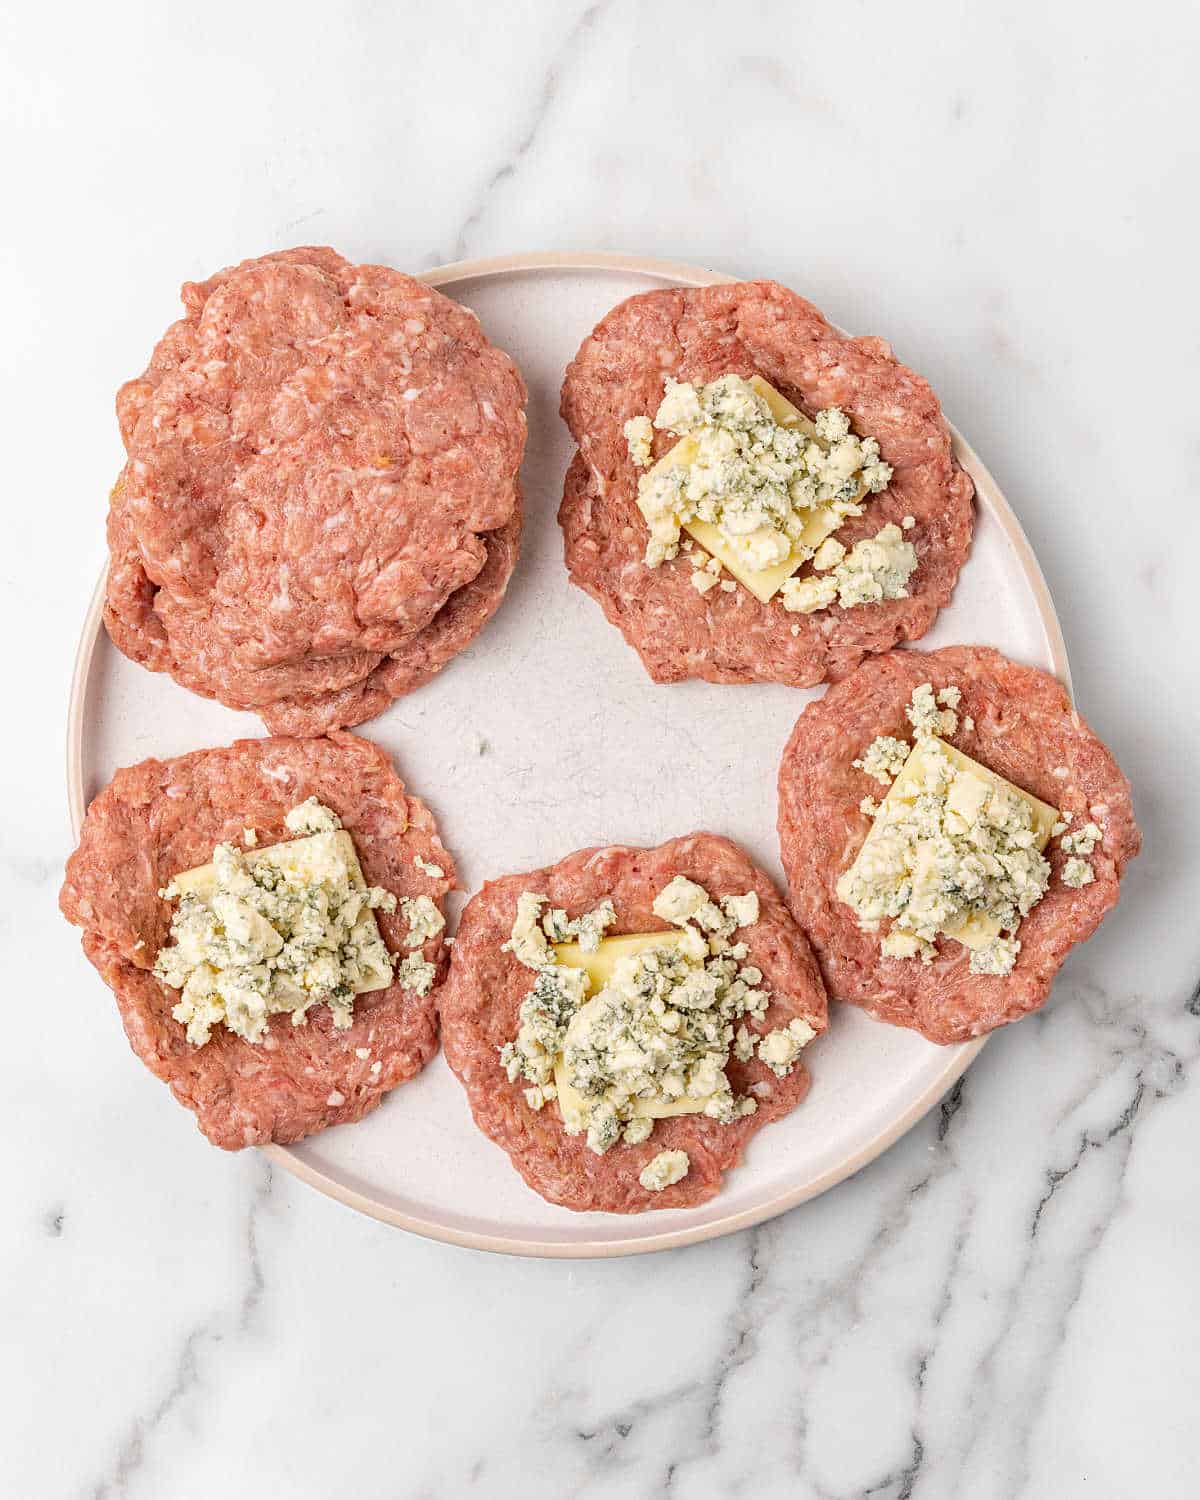 Meat patties with cheese on a white plate on a white and grey striped marble surface.